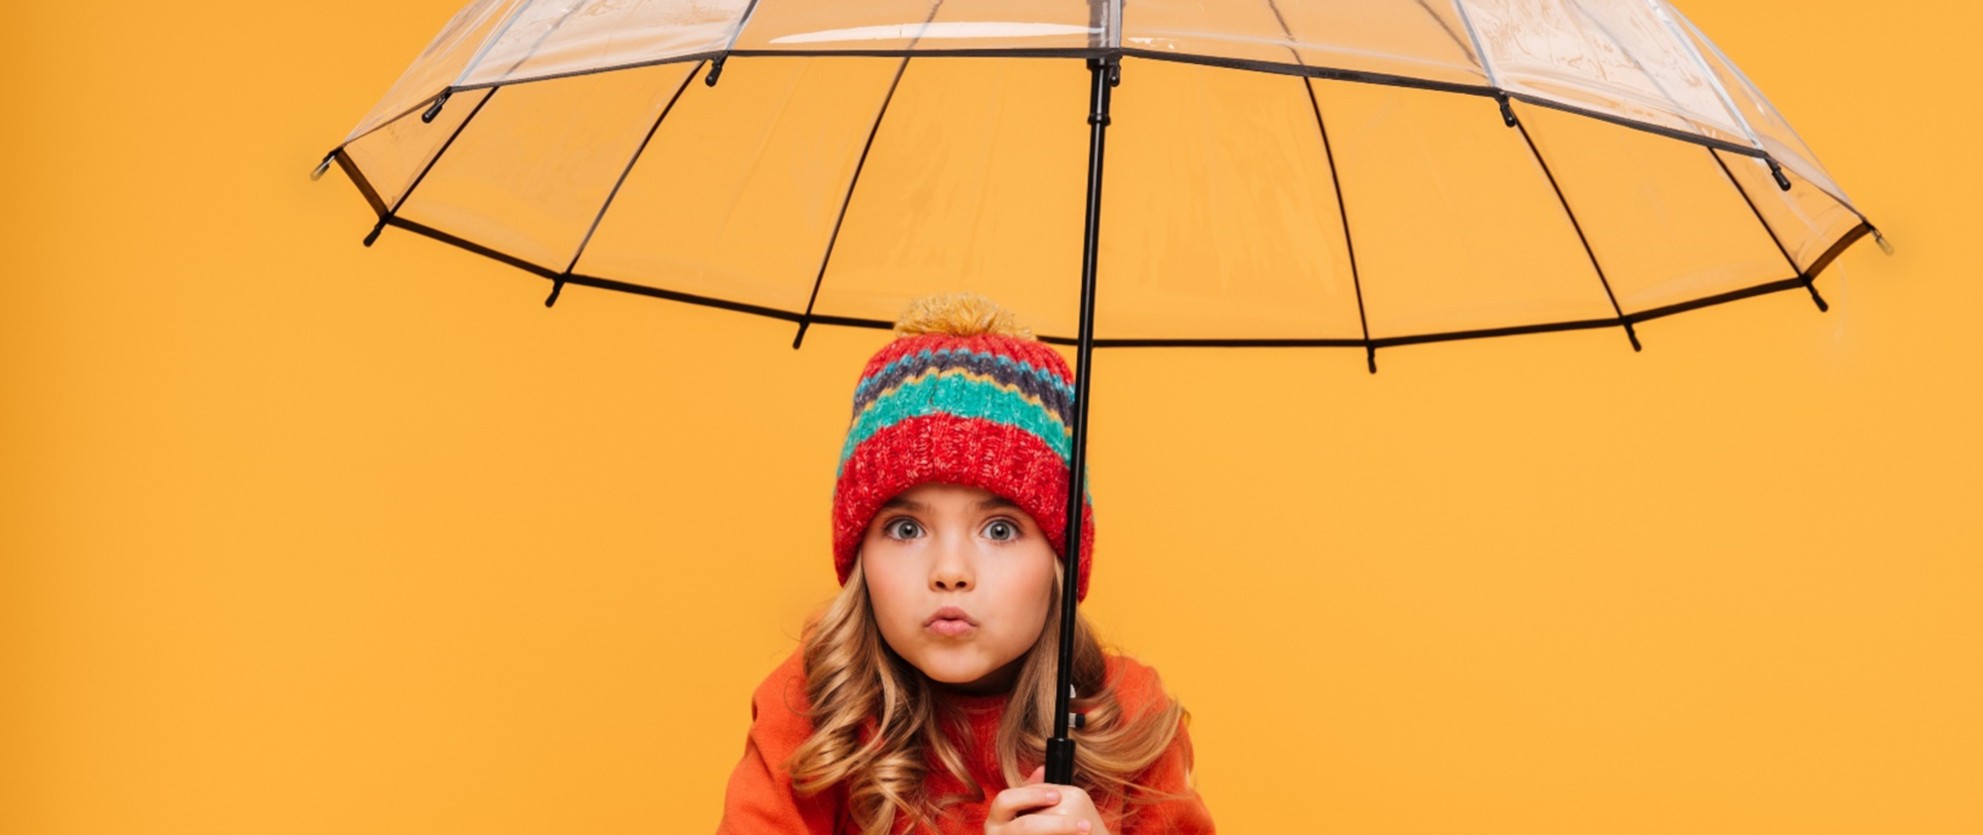 UMBRELLAS AND HATS FOR CHILDREN